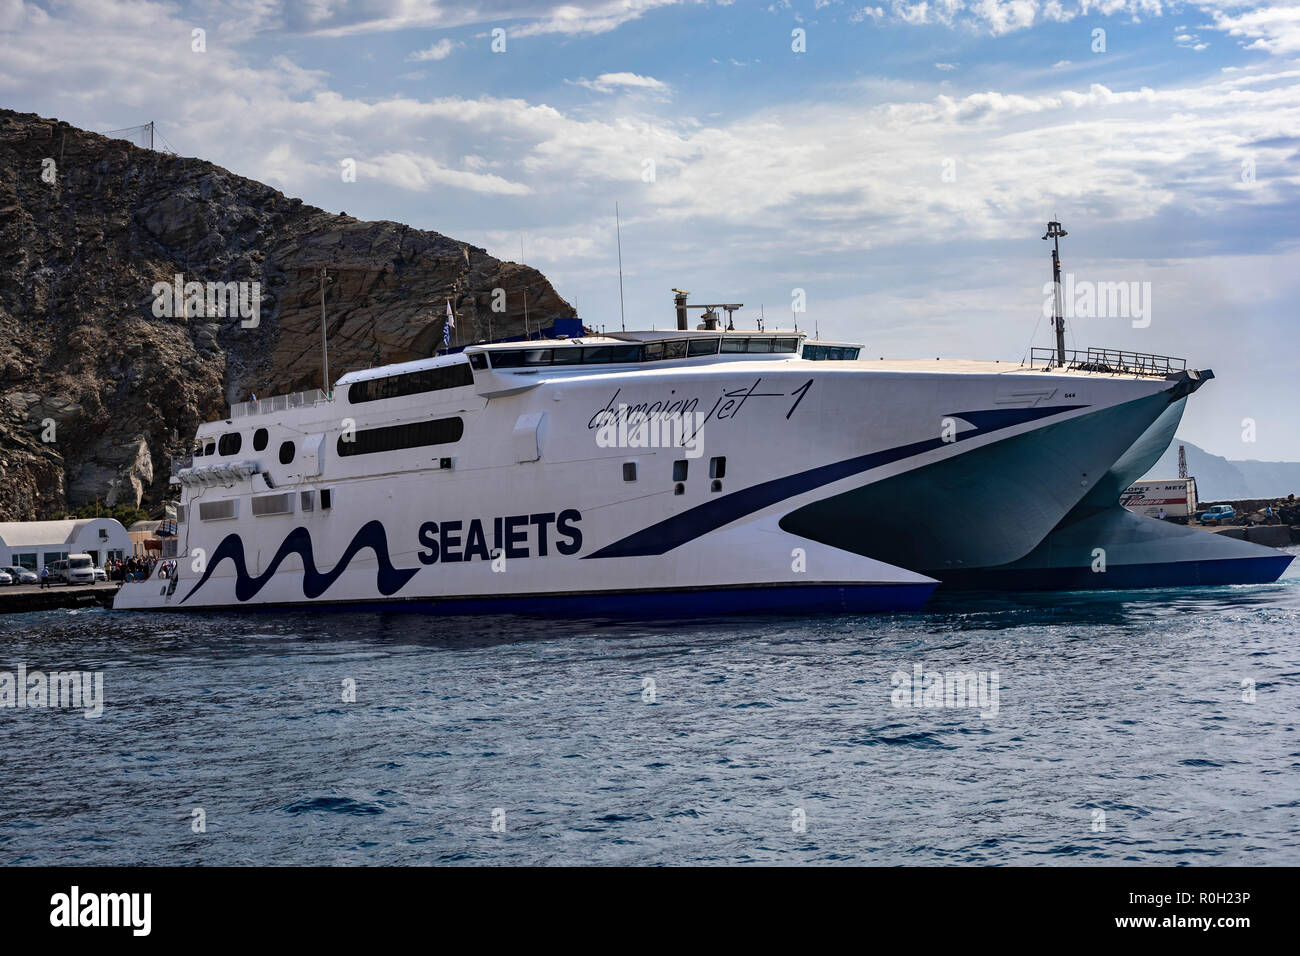 Seajets Champion Jet 1 Catamaran docks in Athinios Port (Αθηνιός) the  primary ferry port of Santorini, located approximately 10 km south of the  capita Stock Photo - Alamy